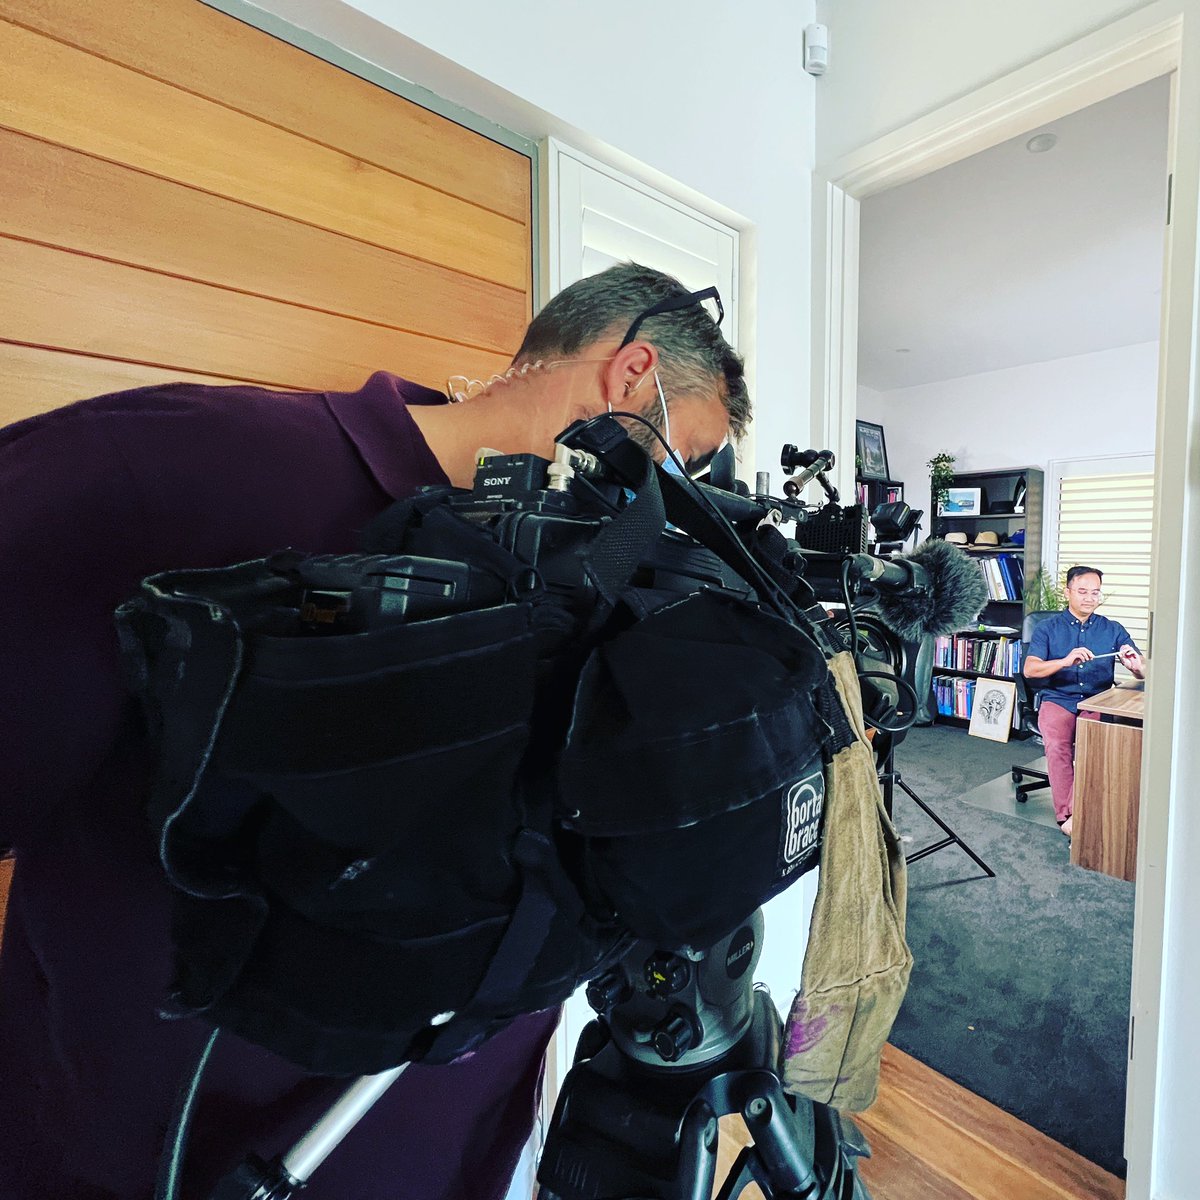 When Channel 10 came to my home. Media skills is essential for the clinician. Our core business is education. What is important and what sells in the media may be different. Finding a way to sell what is important to the media is critical. If you can, get some media training.